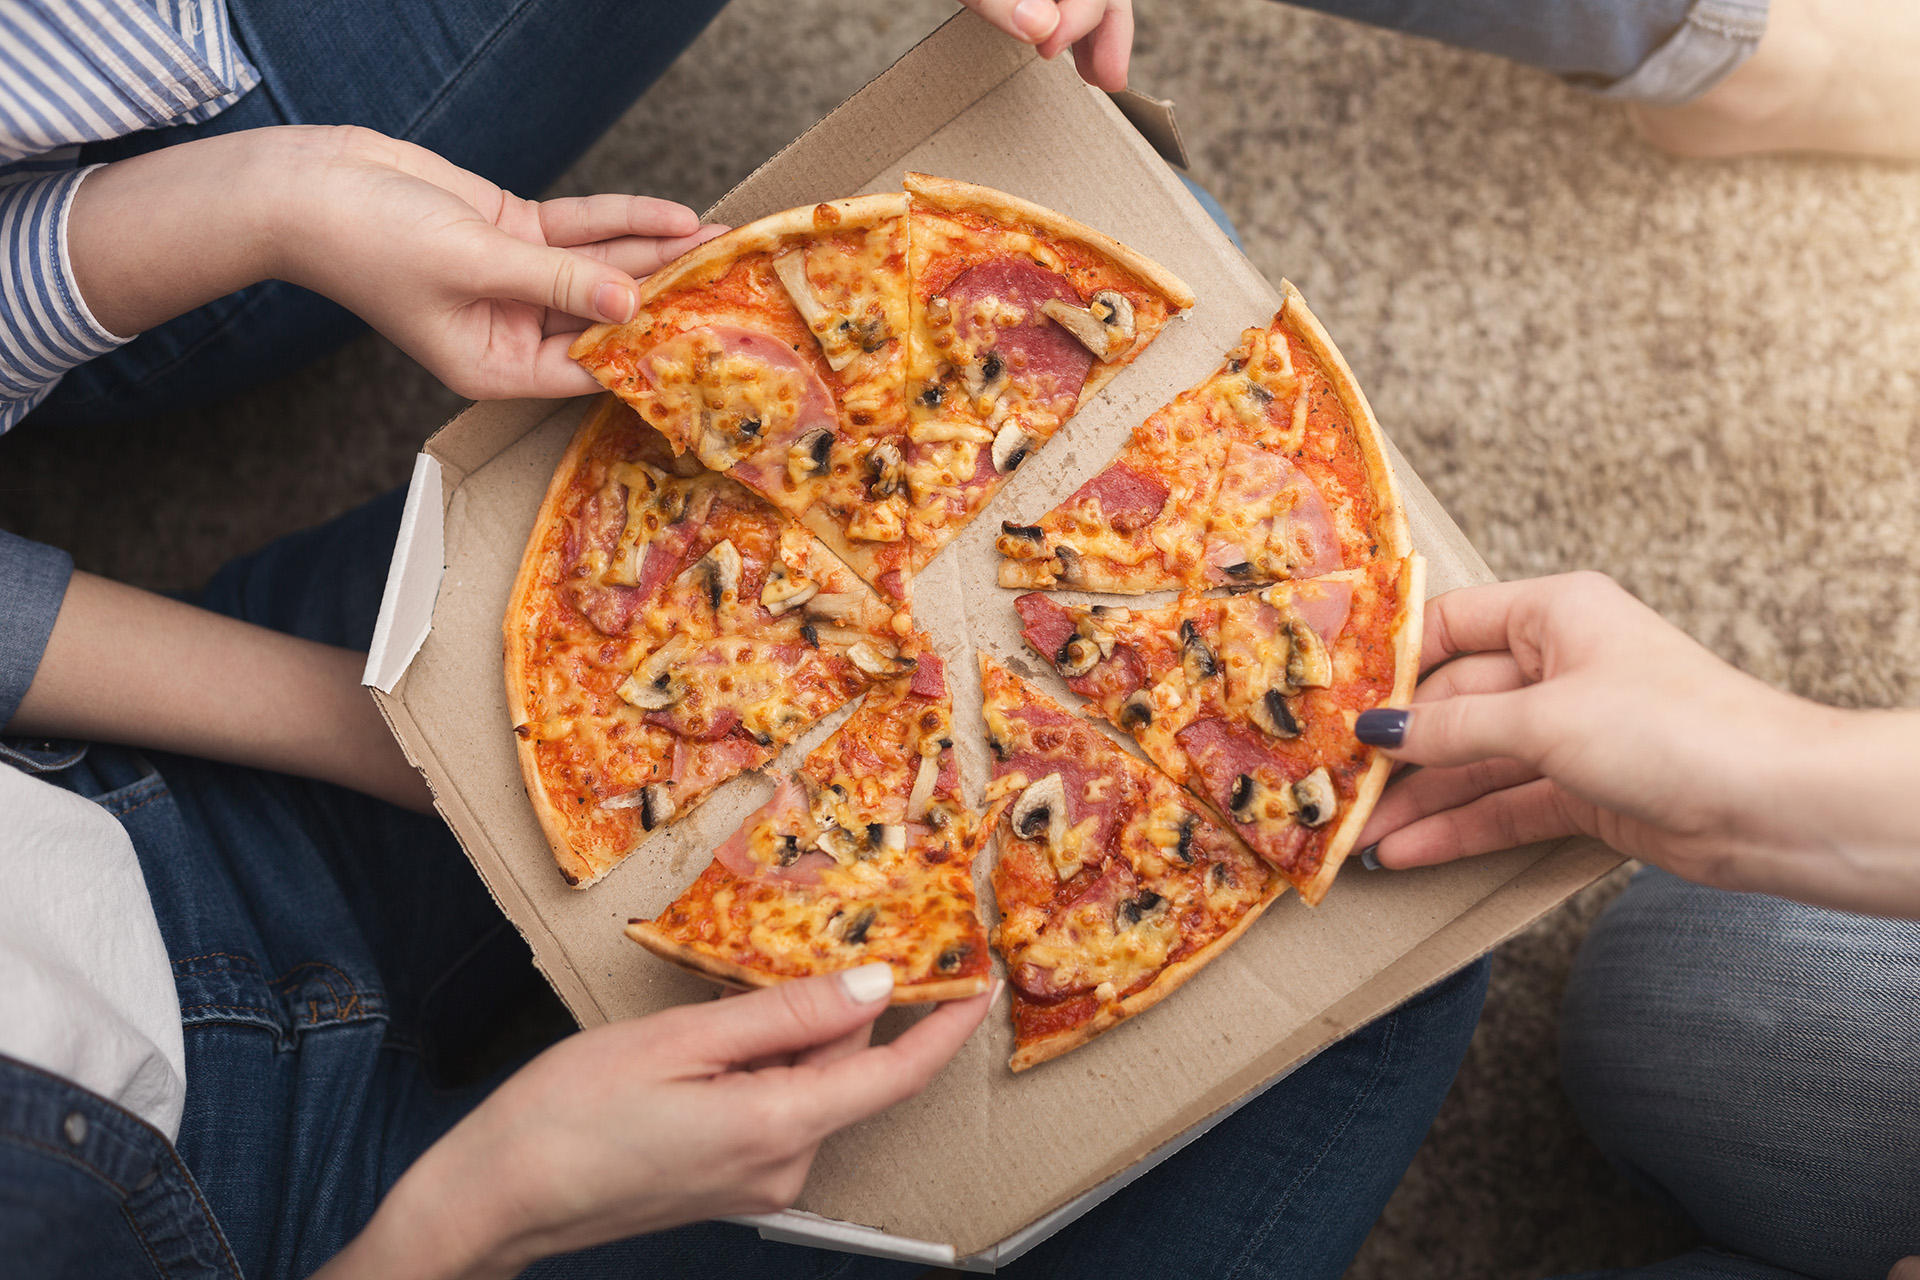 Women's hands reaching for pizza